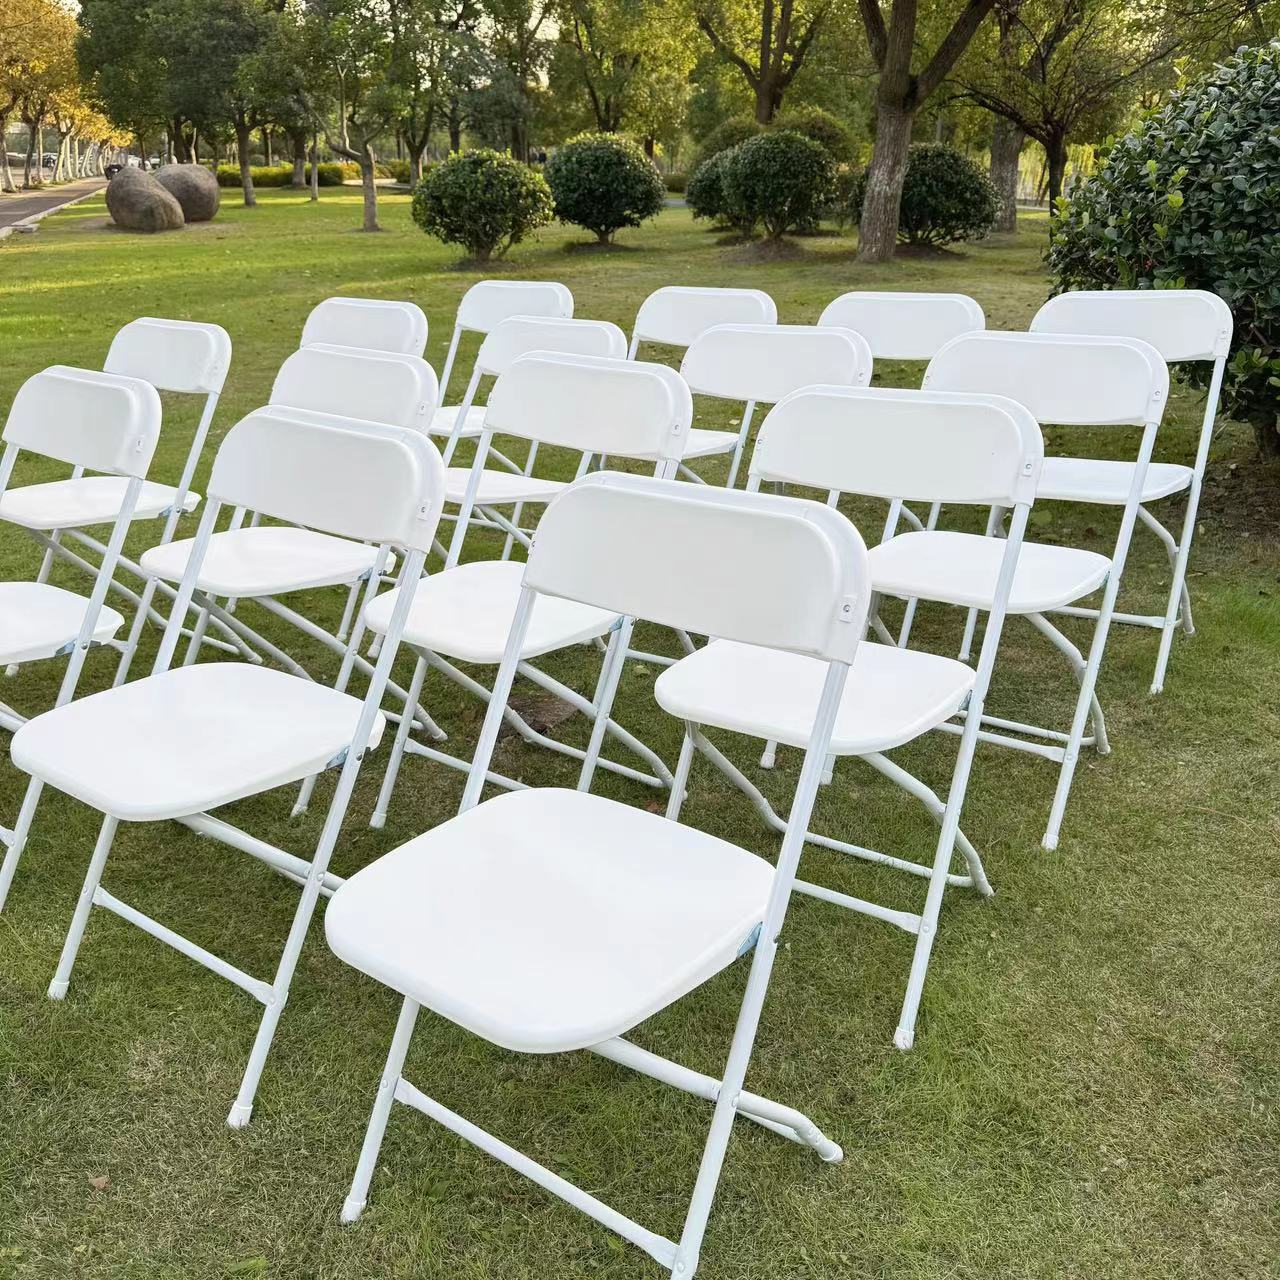 Unlocking Comfort and Convenience: Discover Foldees, Your Ultimate Folding Chairs in Israel